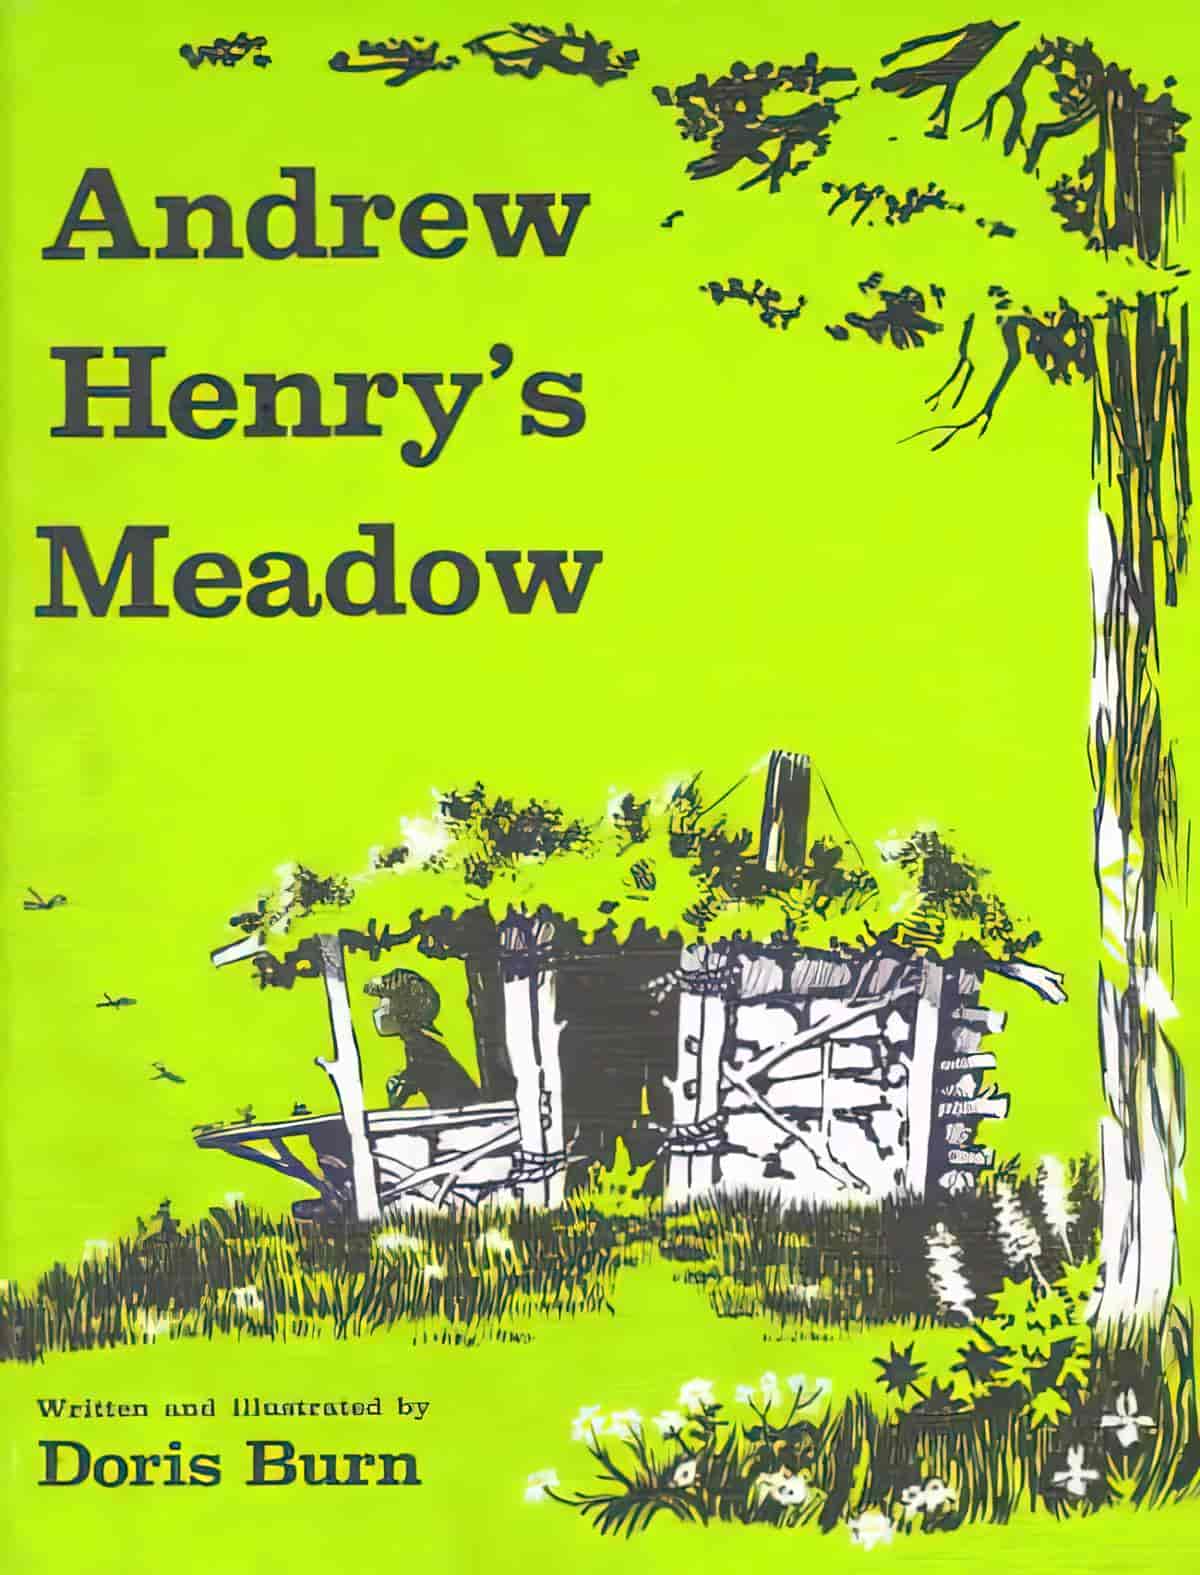 Andrew Henry's Meadow Written and Illustrated by Doris Burn book cover with chartreuse green background and a hut under a tree in a meadow